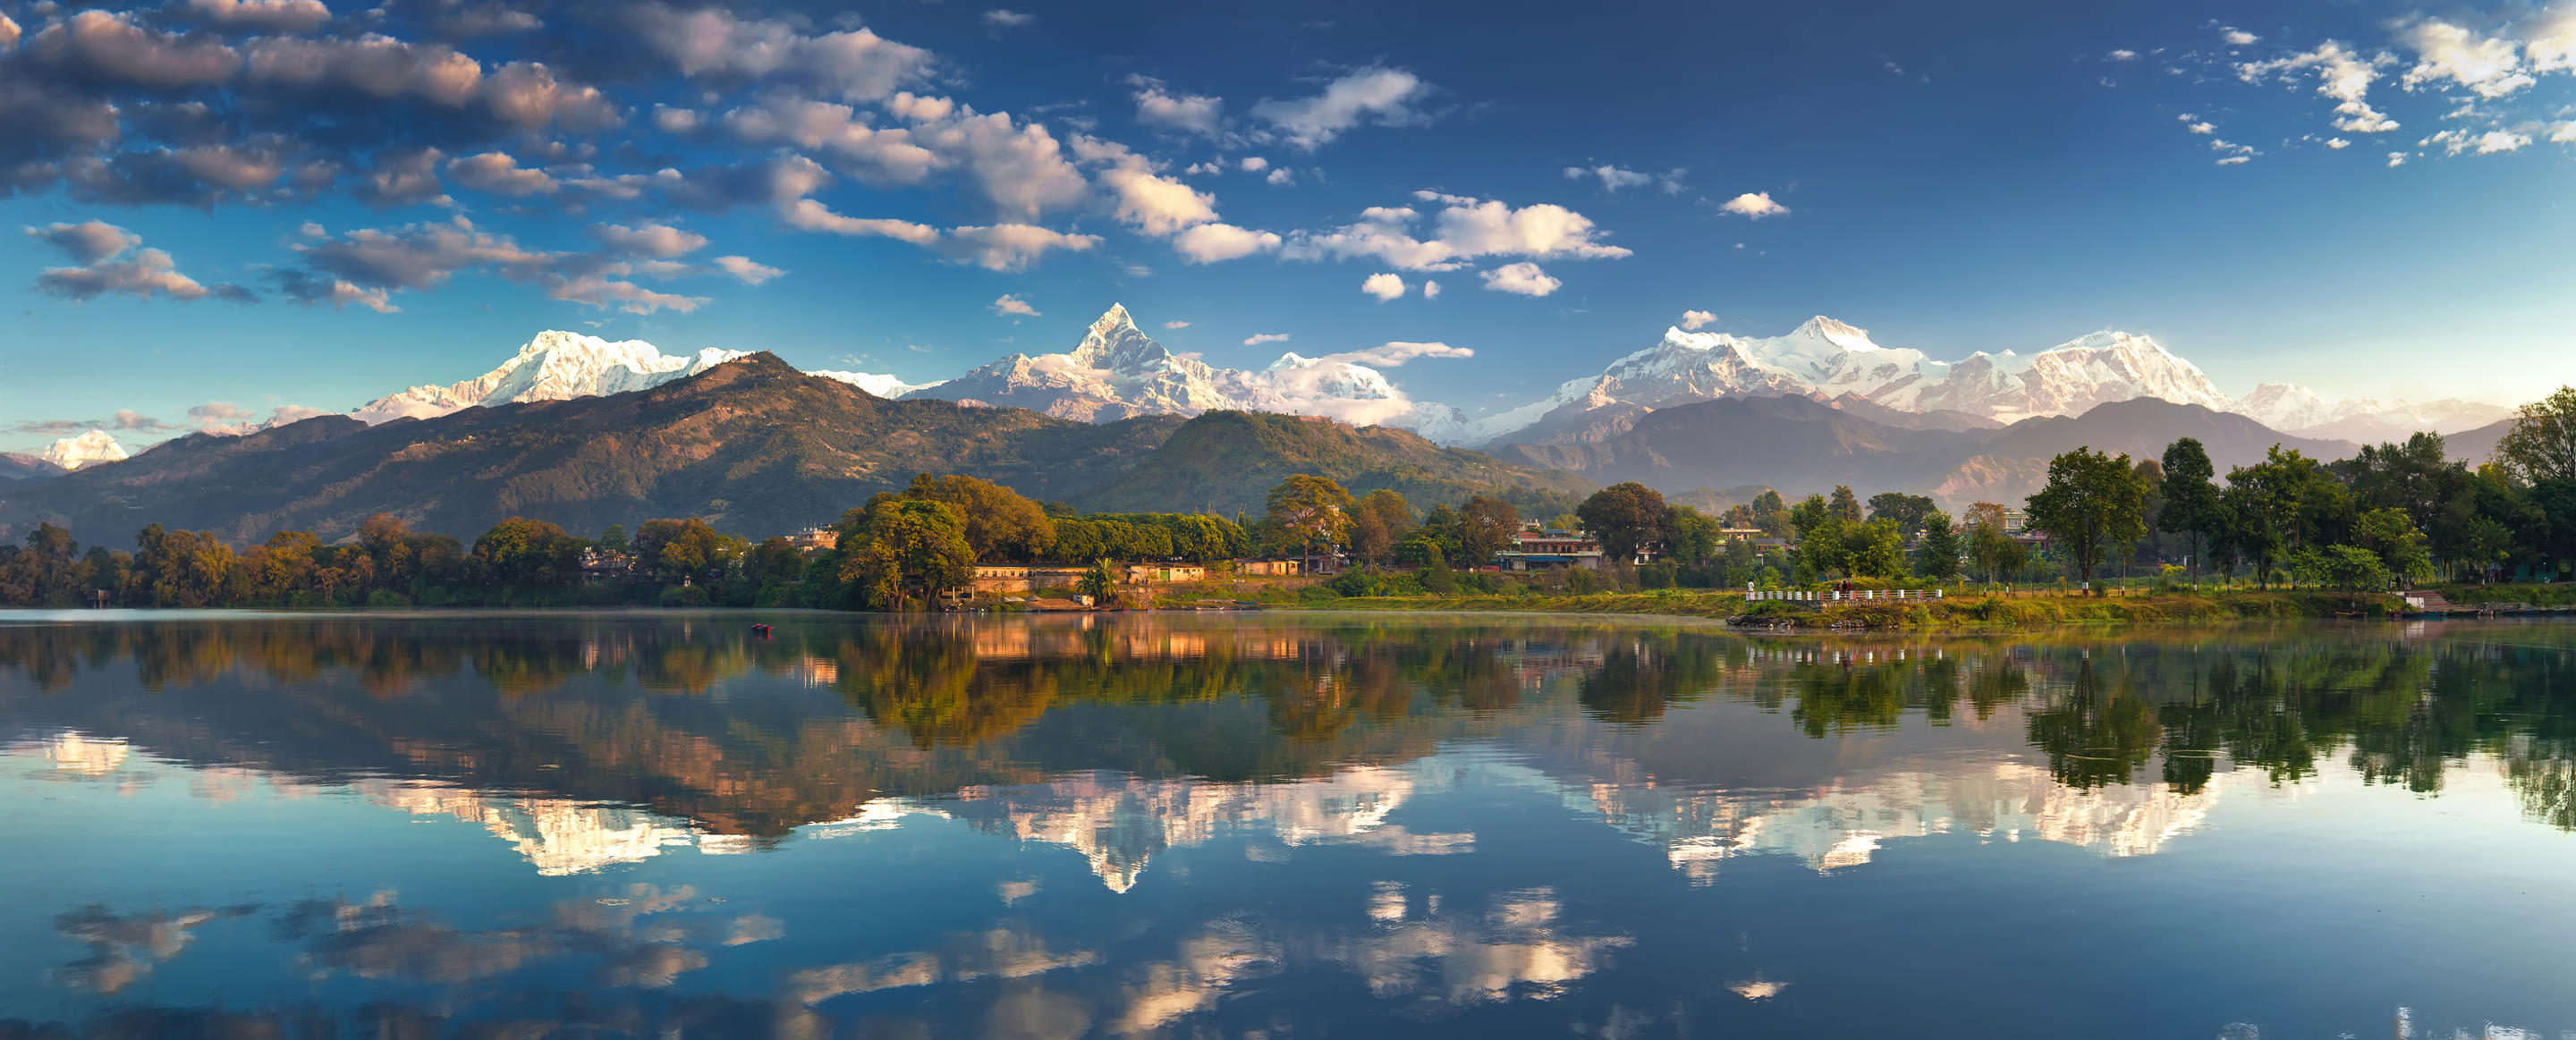 Pokhara Tour Packages | Upto 50% Off May Mega SALE